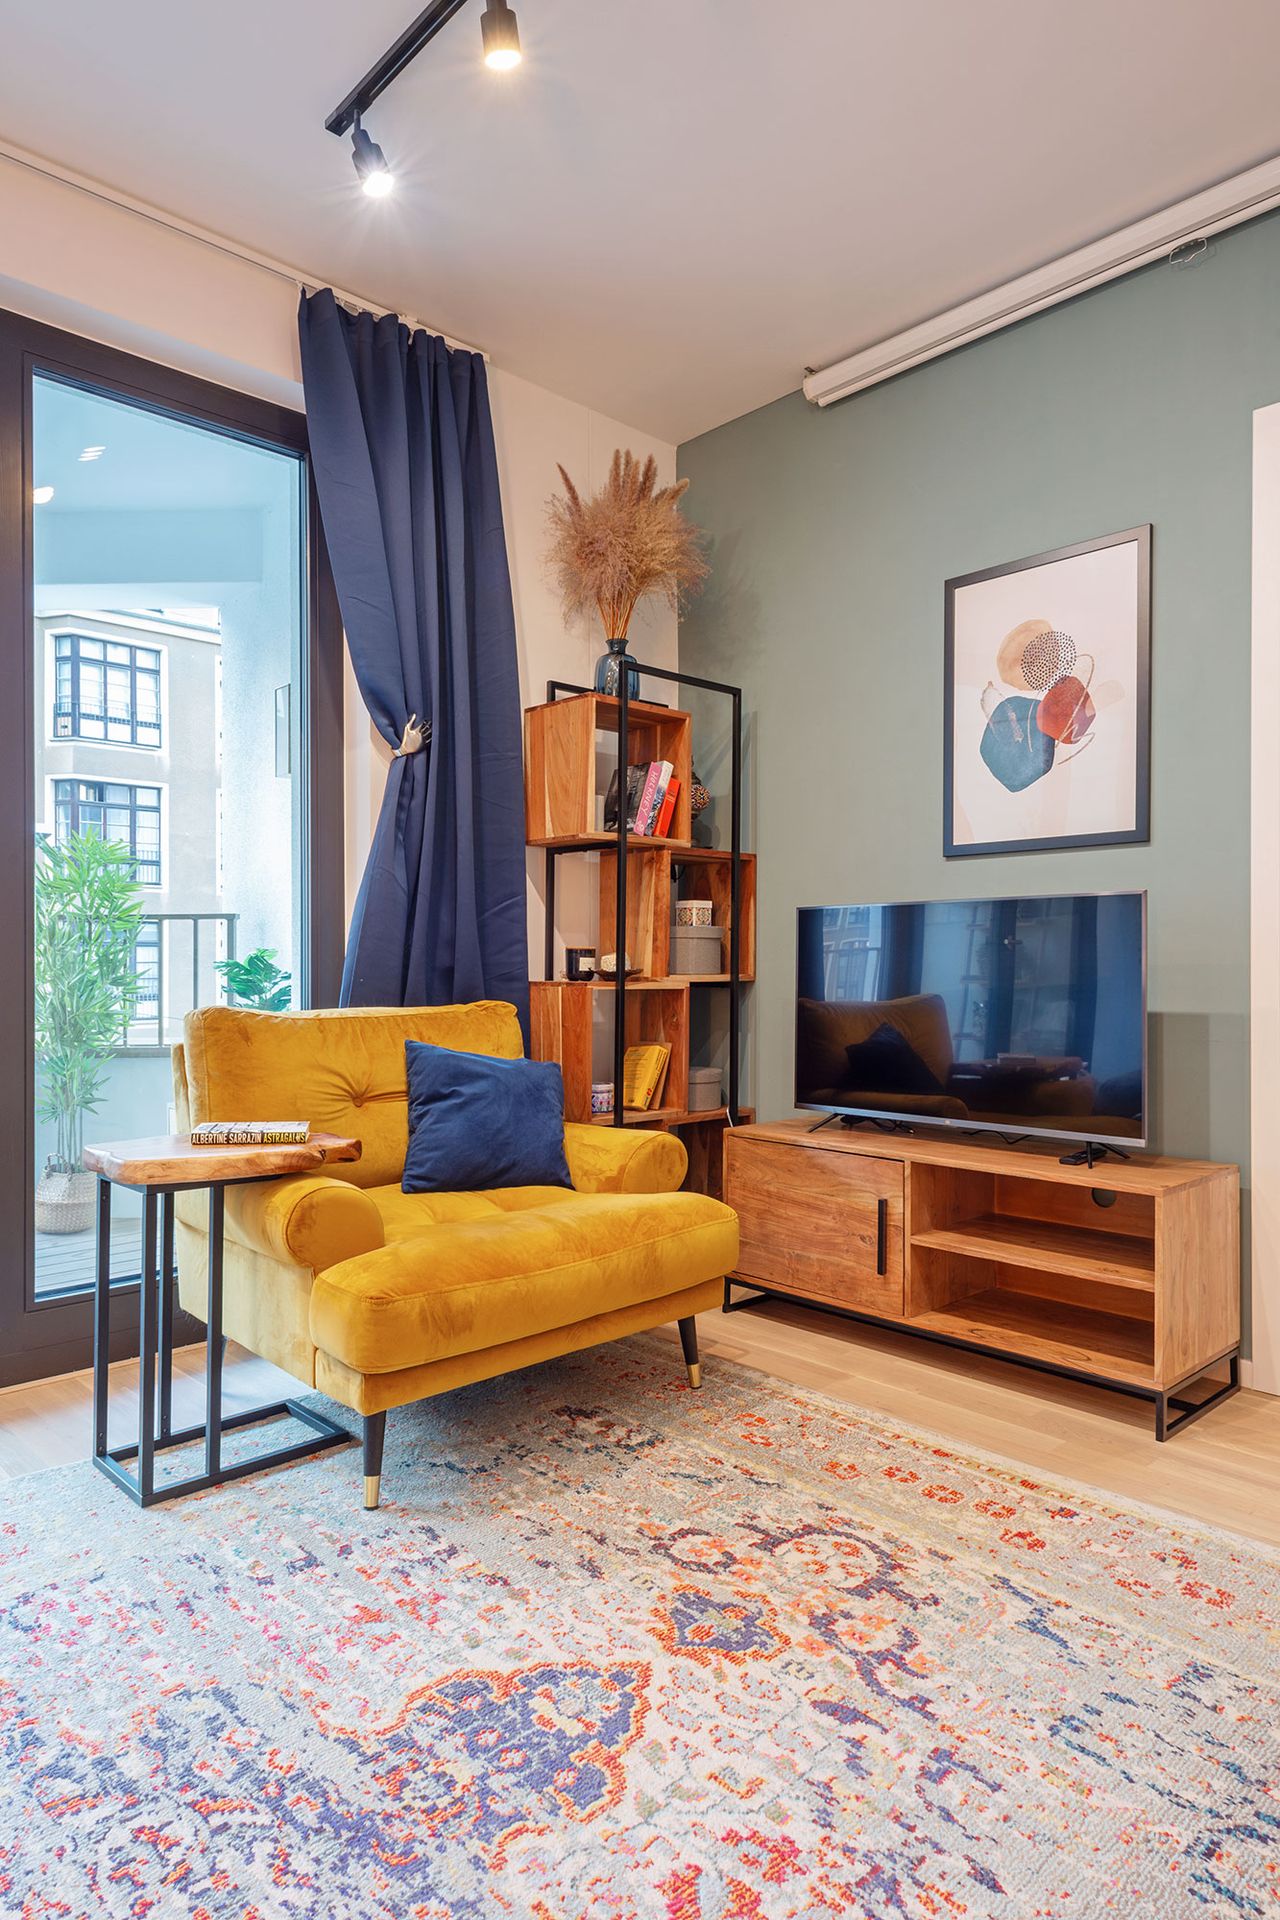 Exclusive stylish and fully-equipped apartment in the heart of Berlin, perfect for home-office with the large cozy balcony